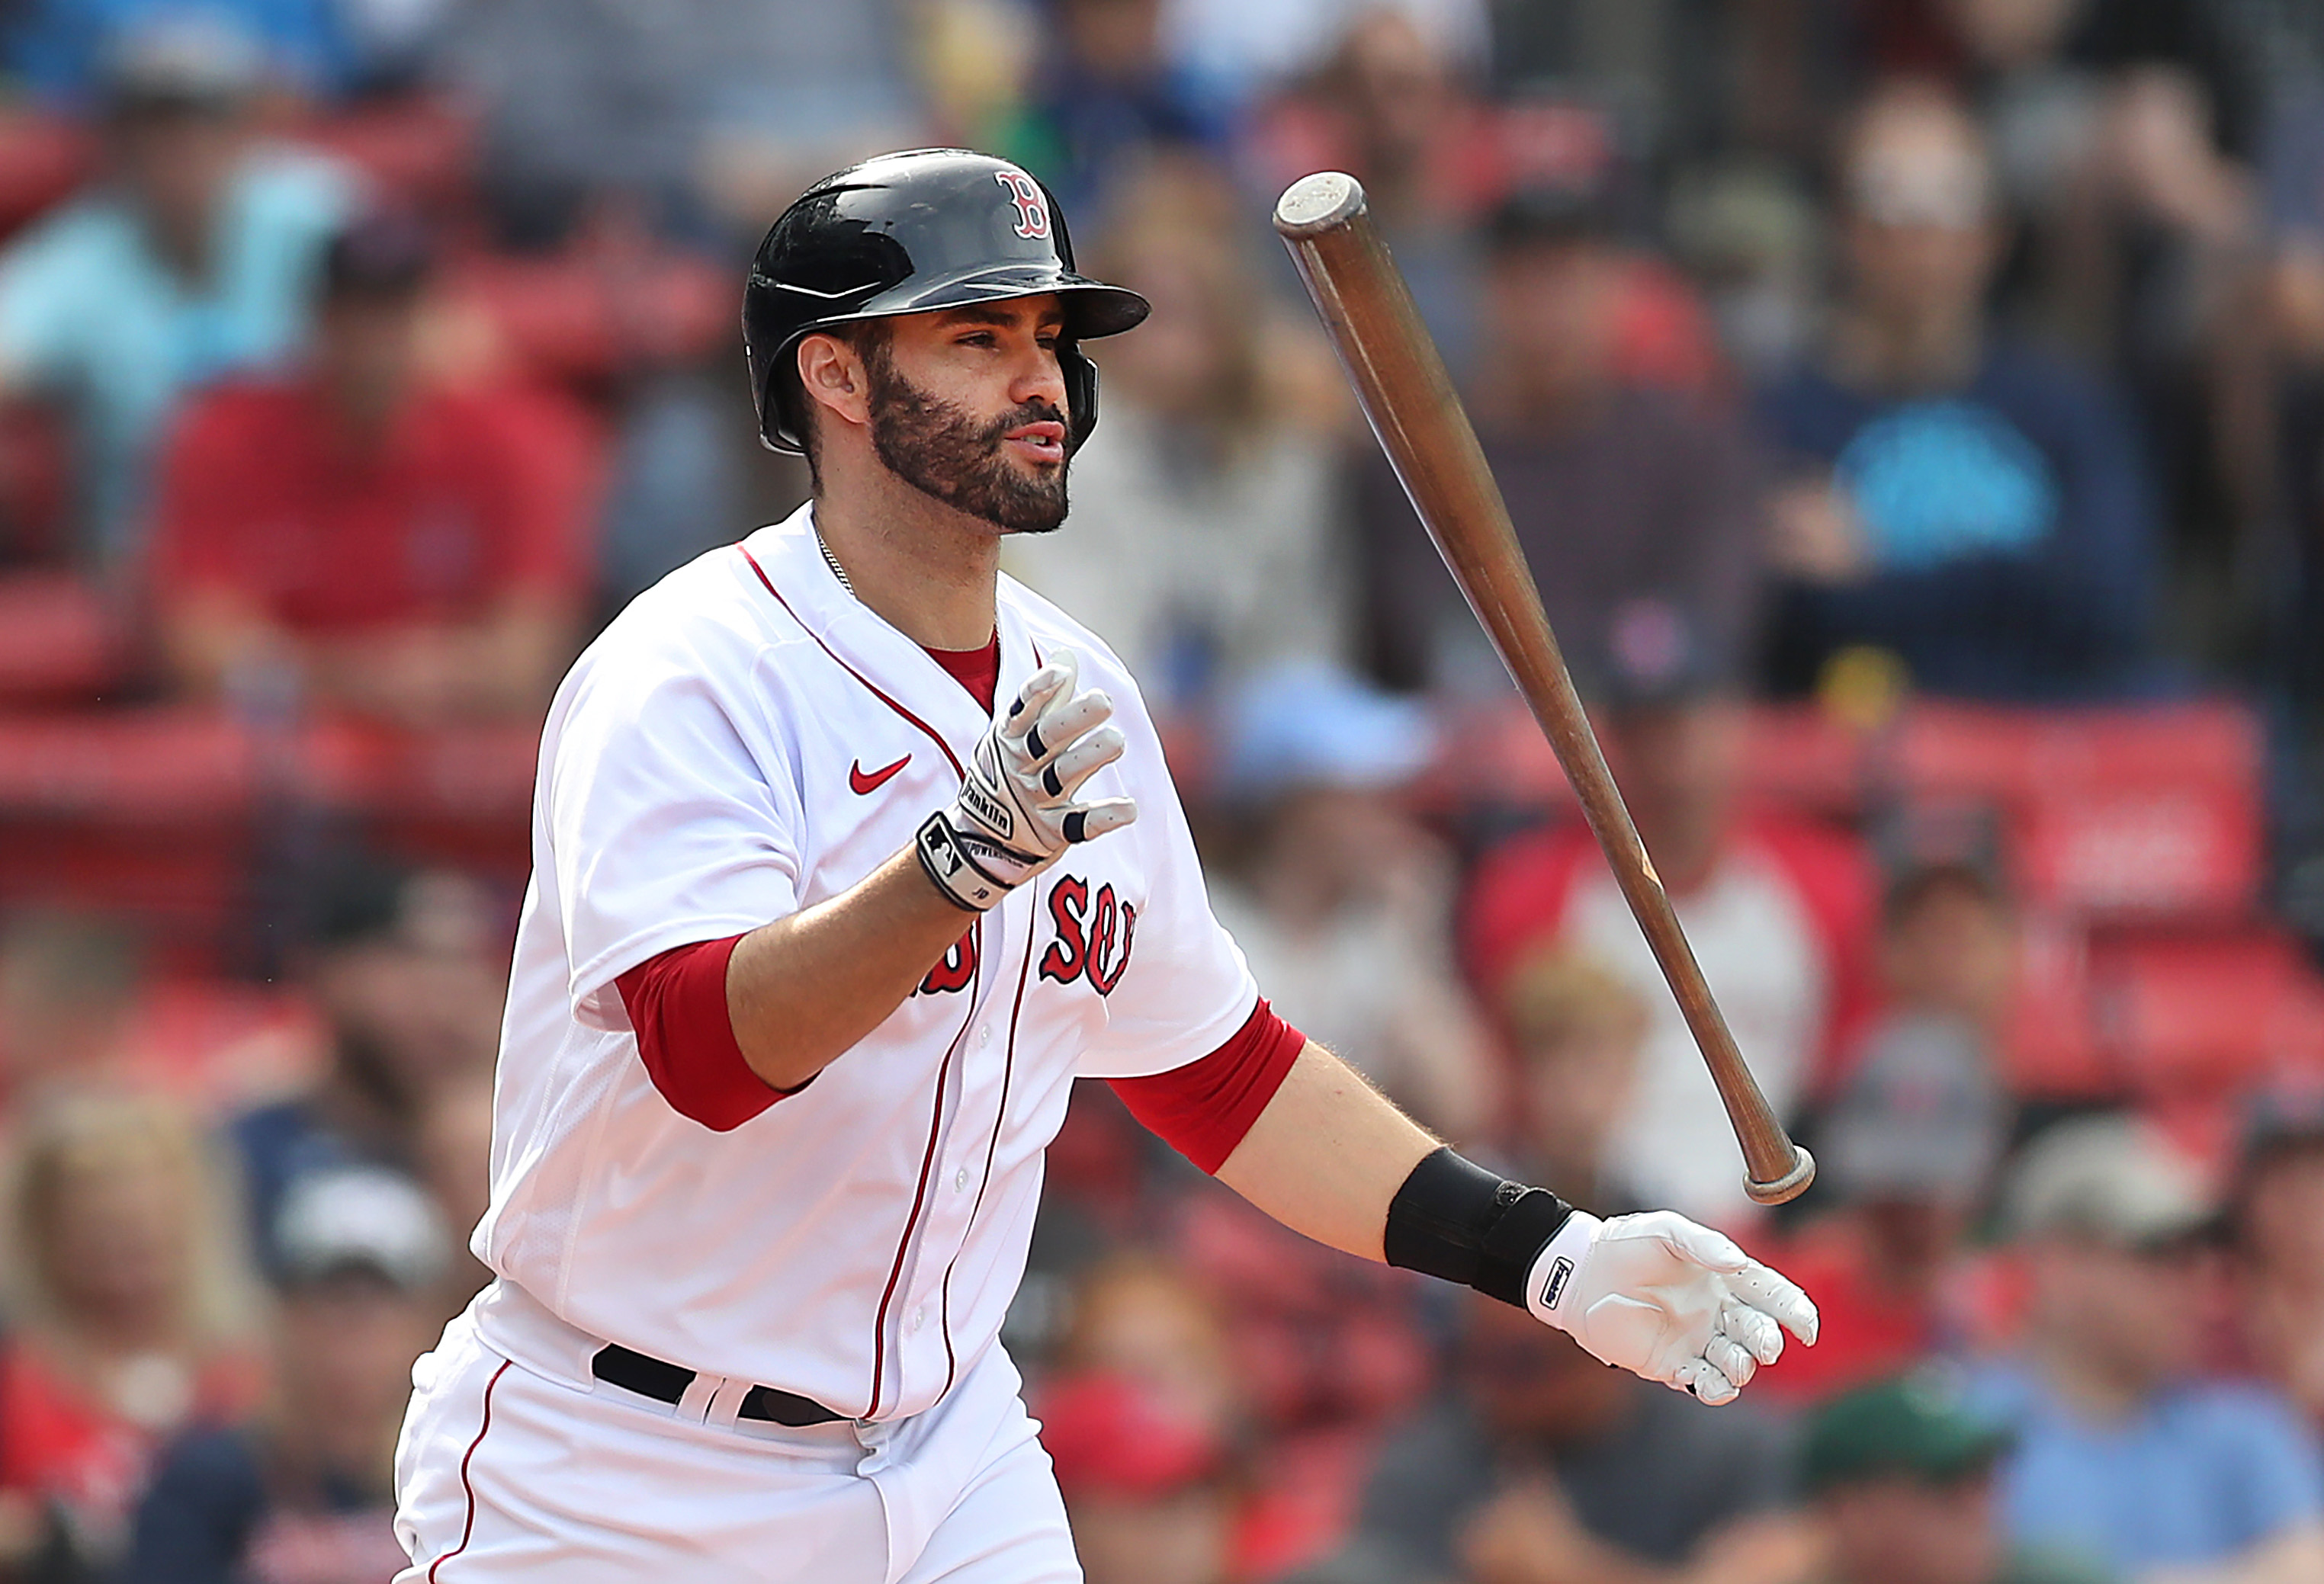 J.D. Martinez hit .238 for his first 20 games in the month of August.